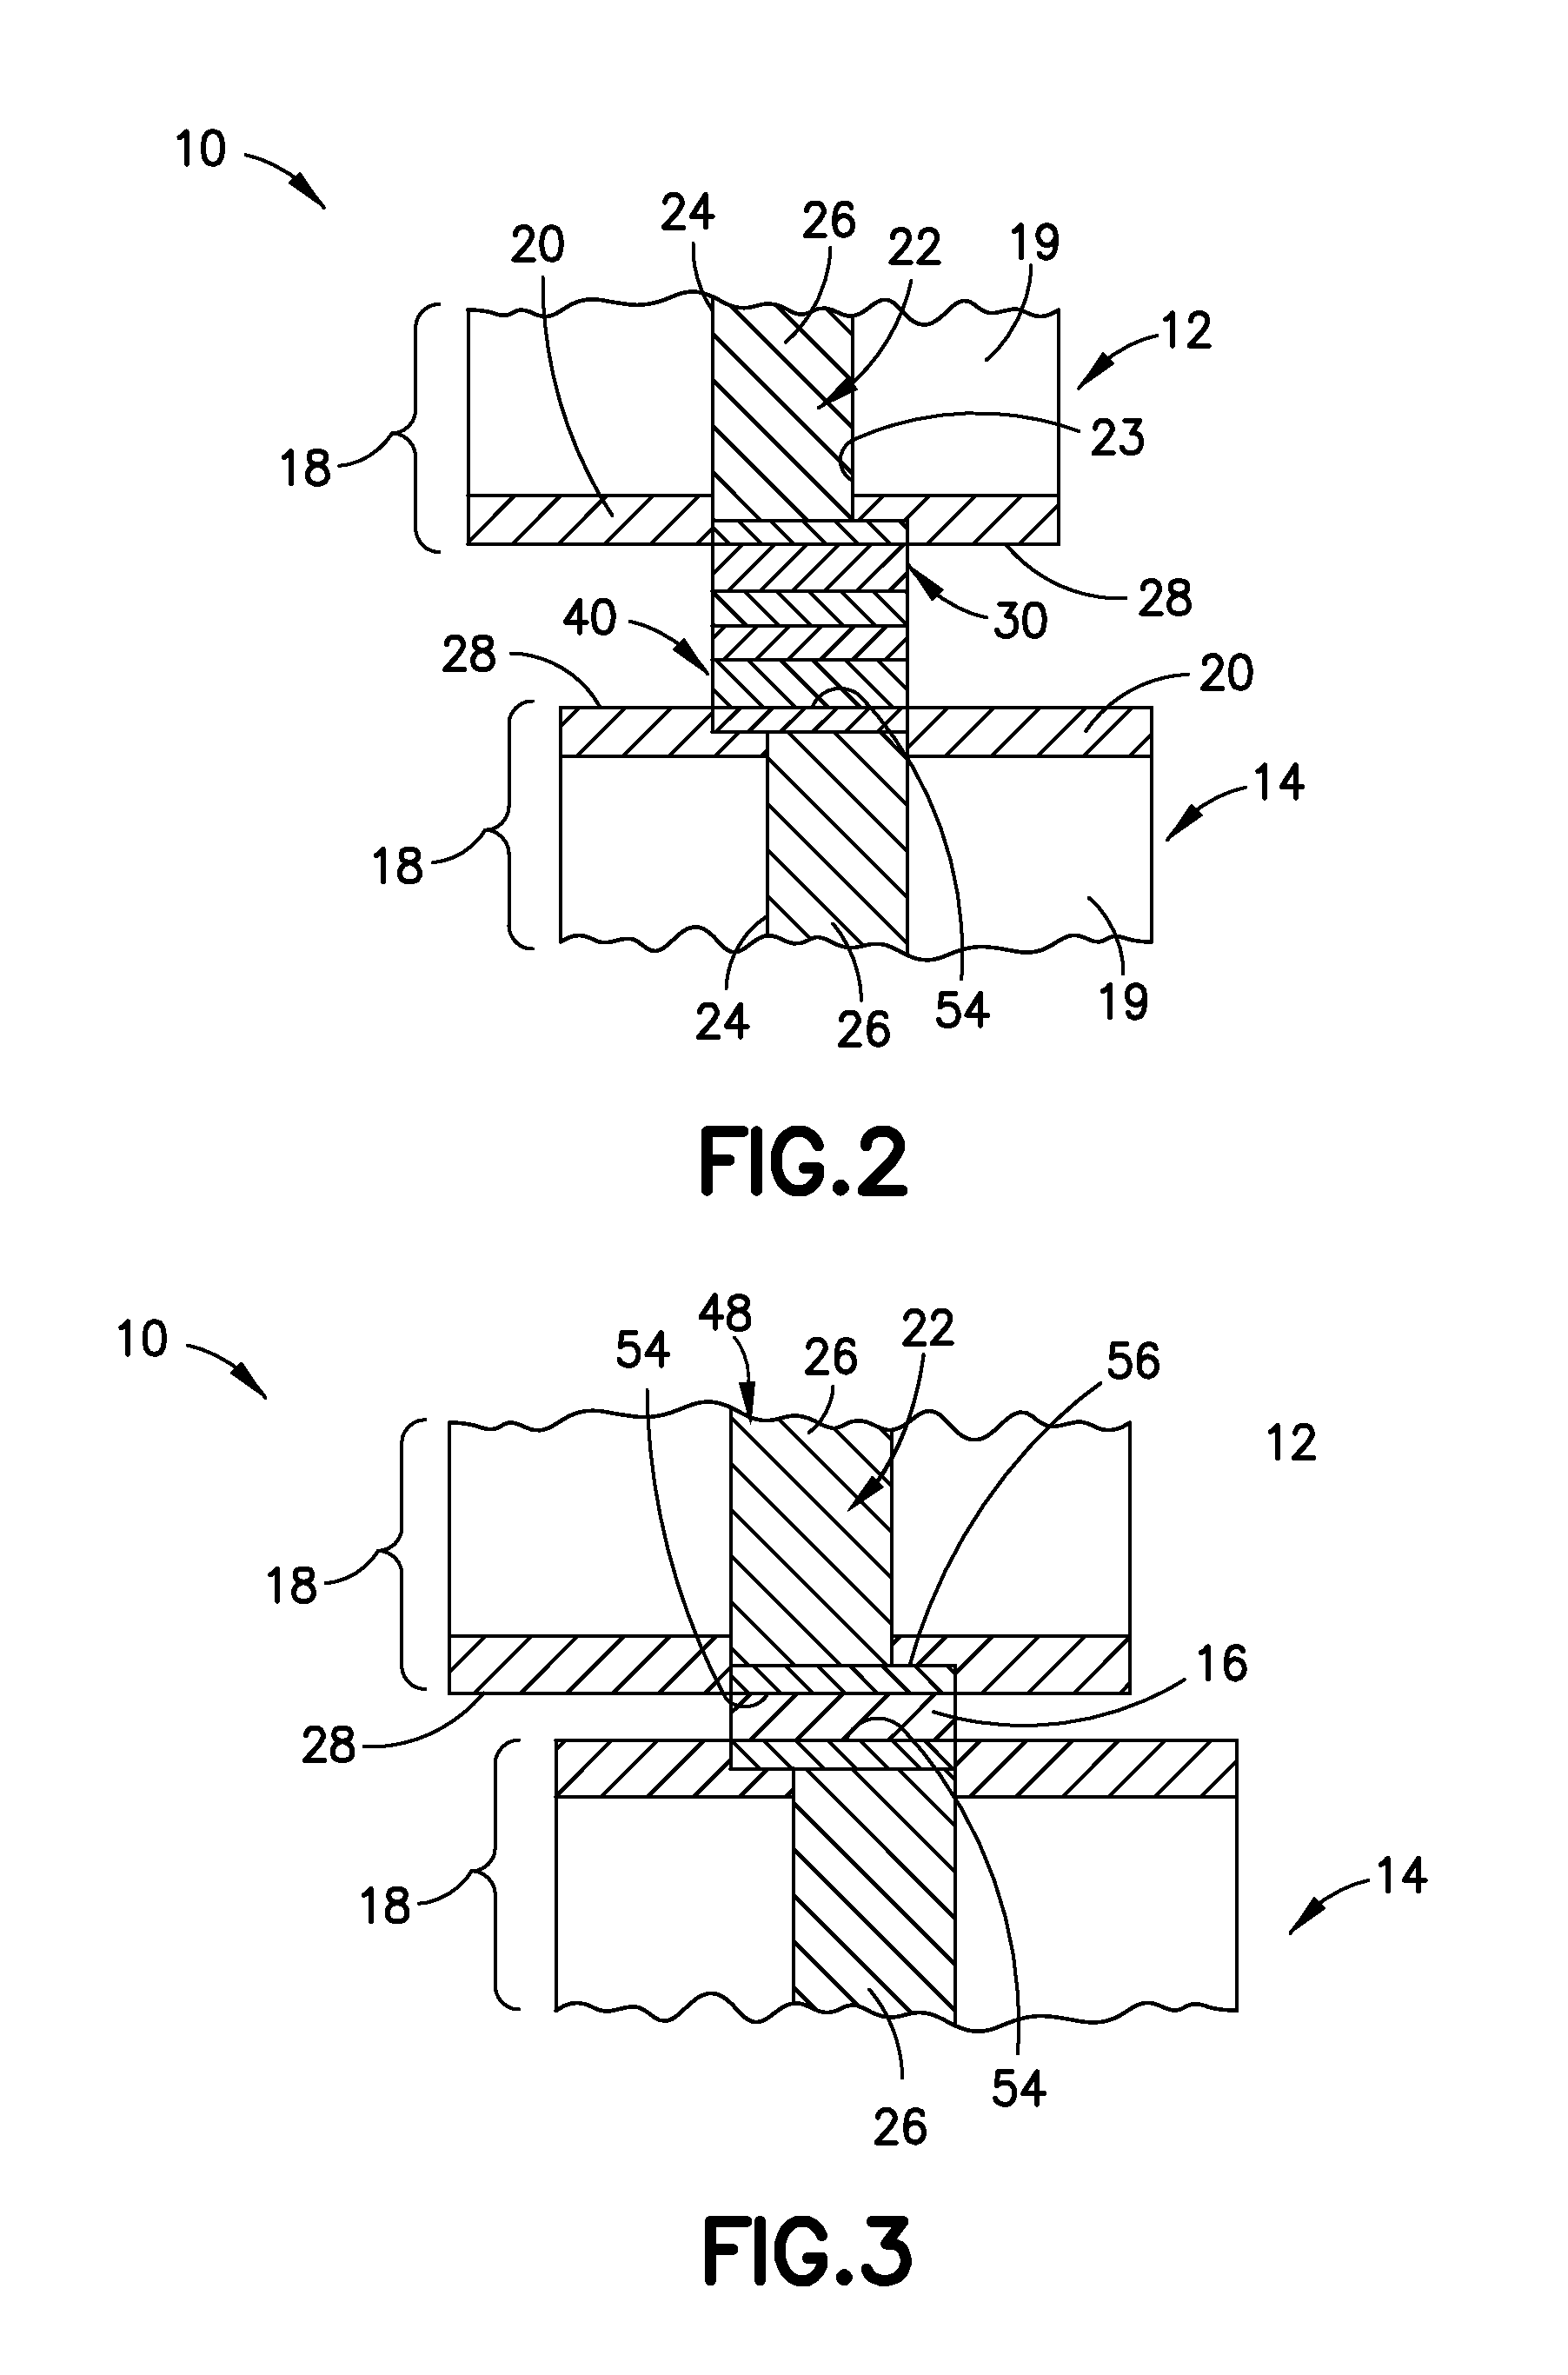 Advanced device assembly structures and methods